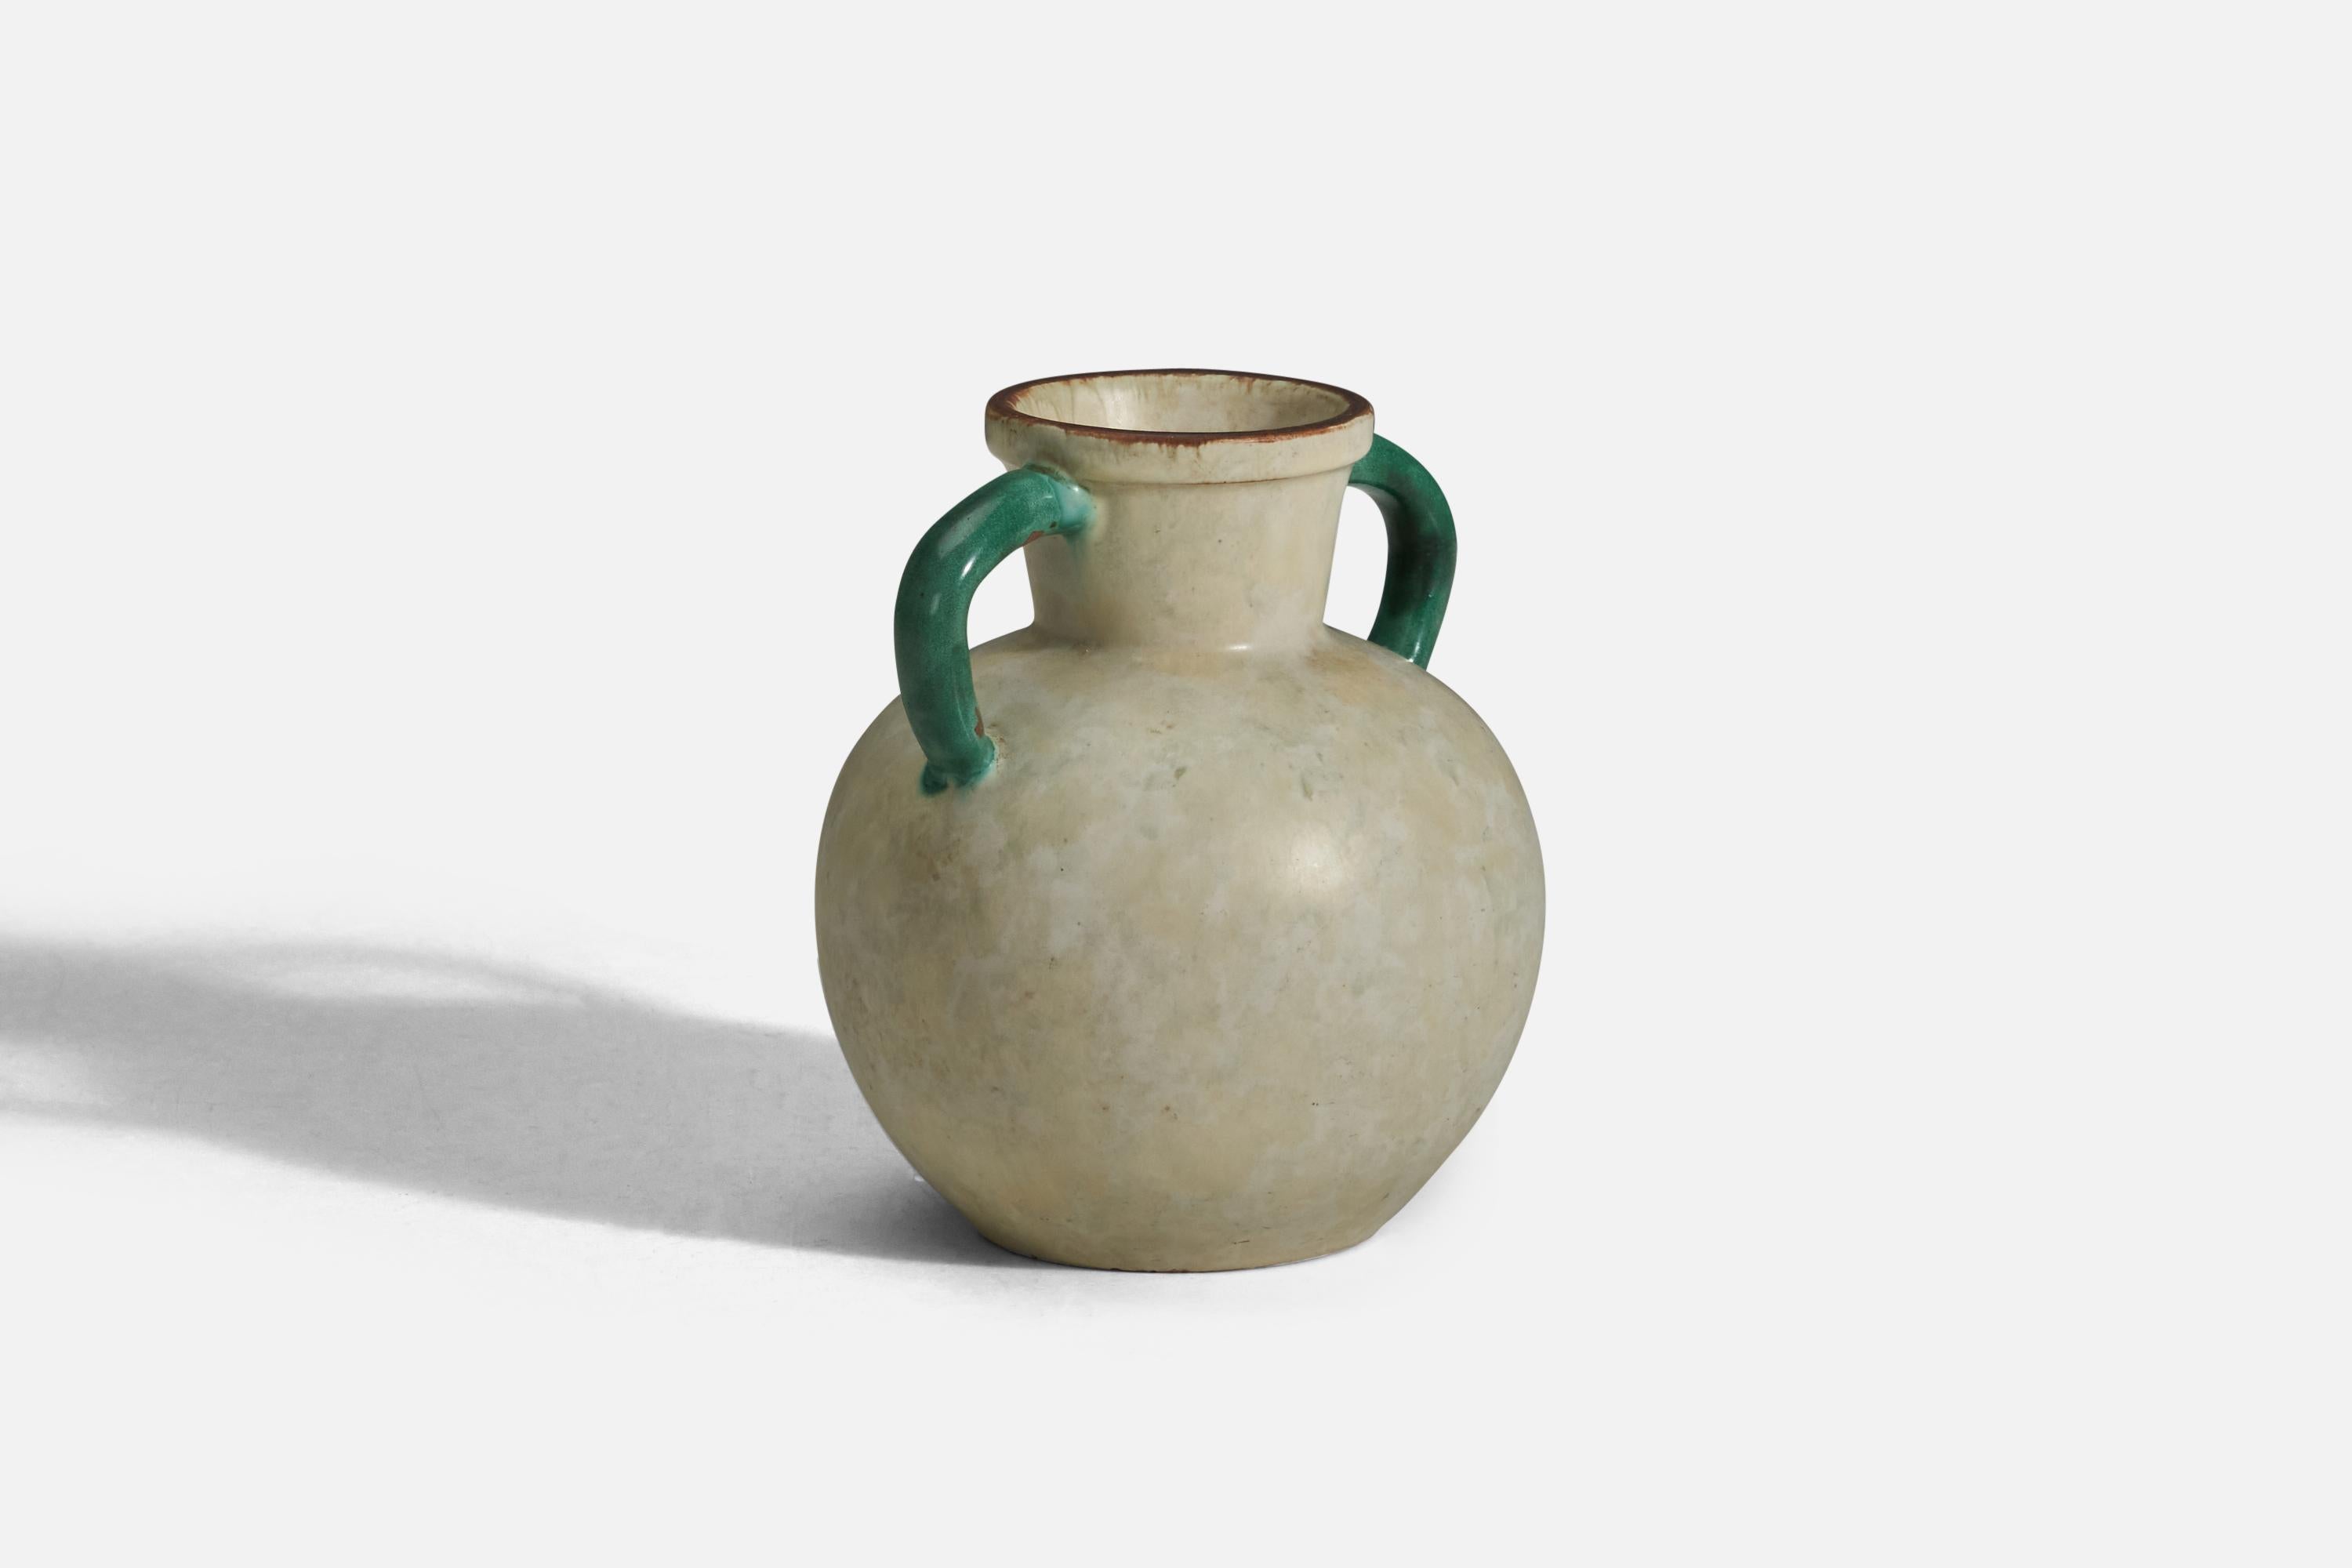 An off-white and green glazed earthenware vase designed and produced by Upsala Ekeby, Sweden, 1940s.